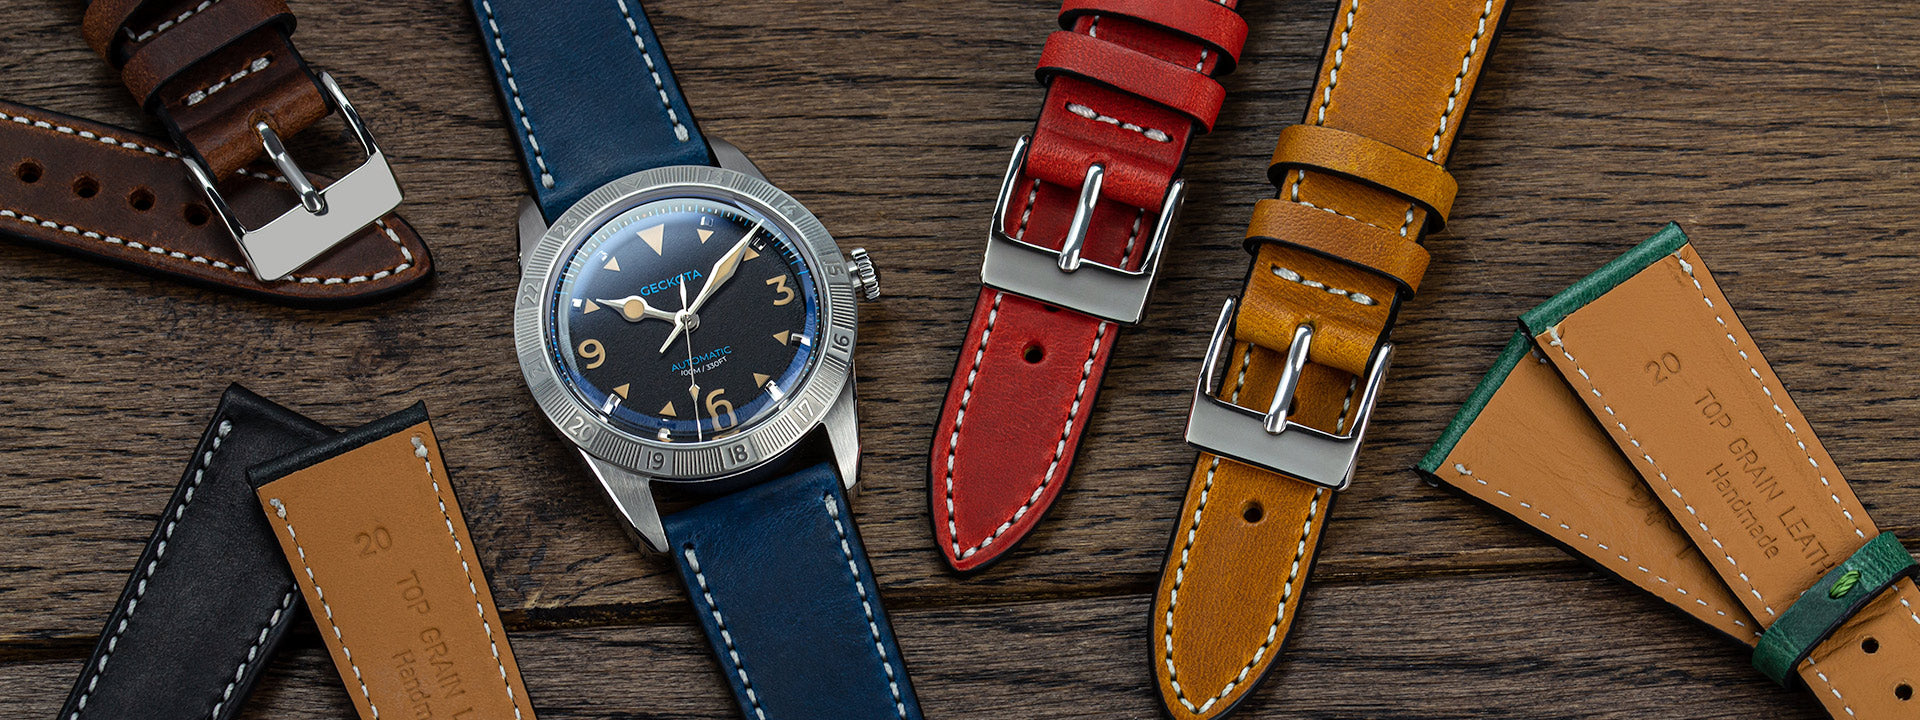 Our recommended watch straps and pairing suggestions